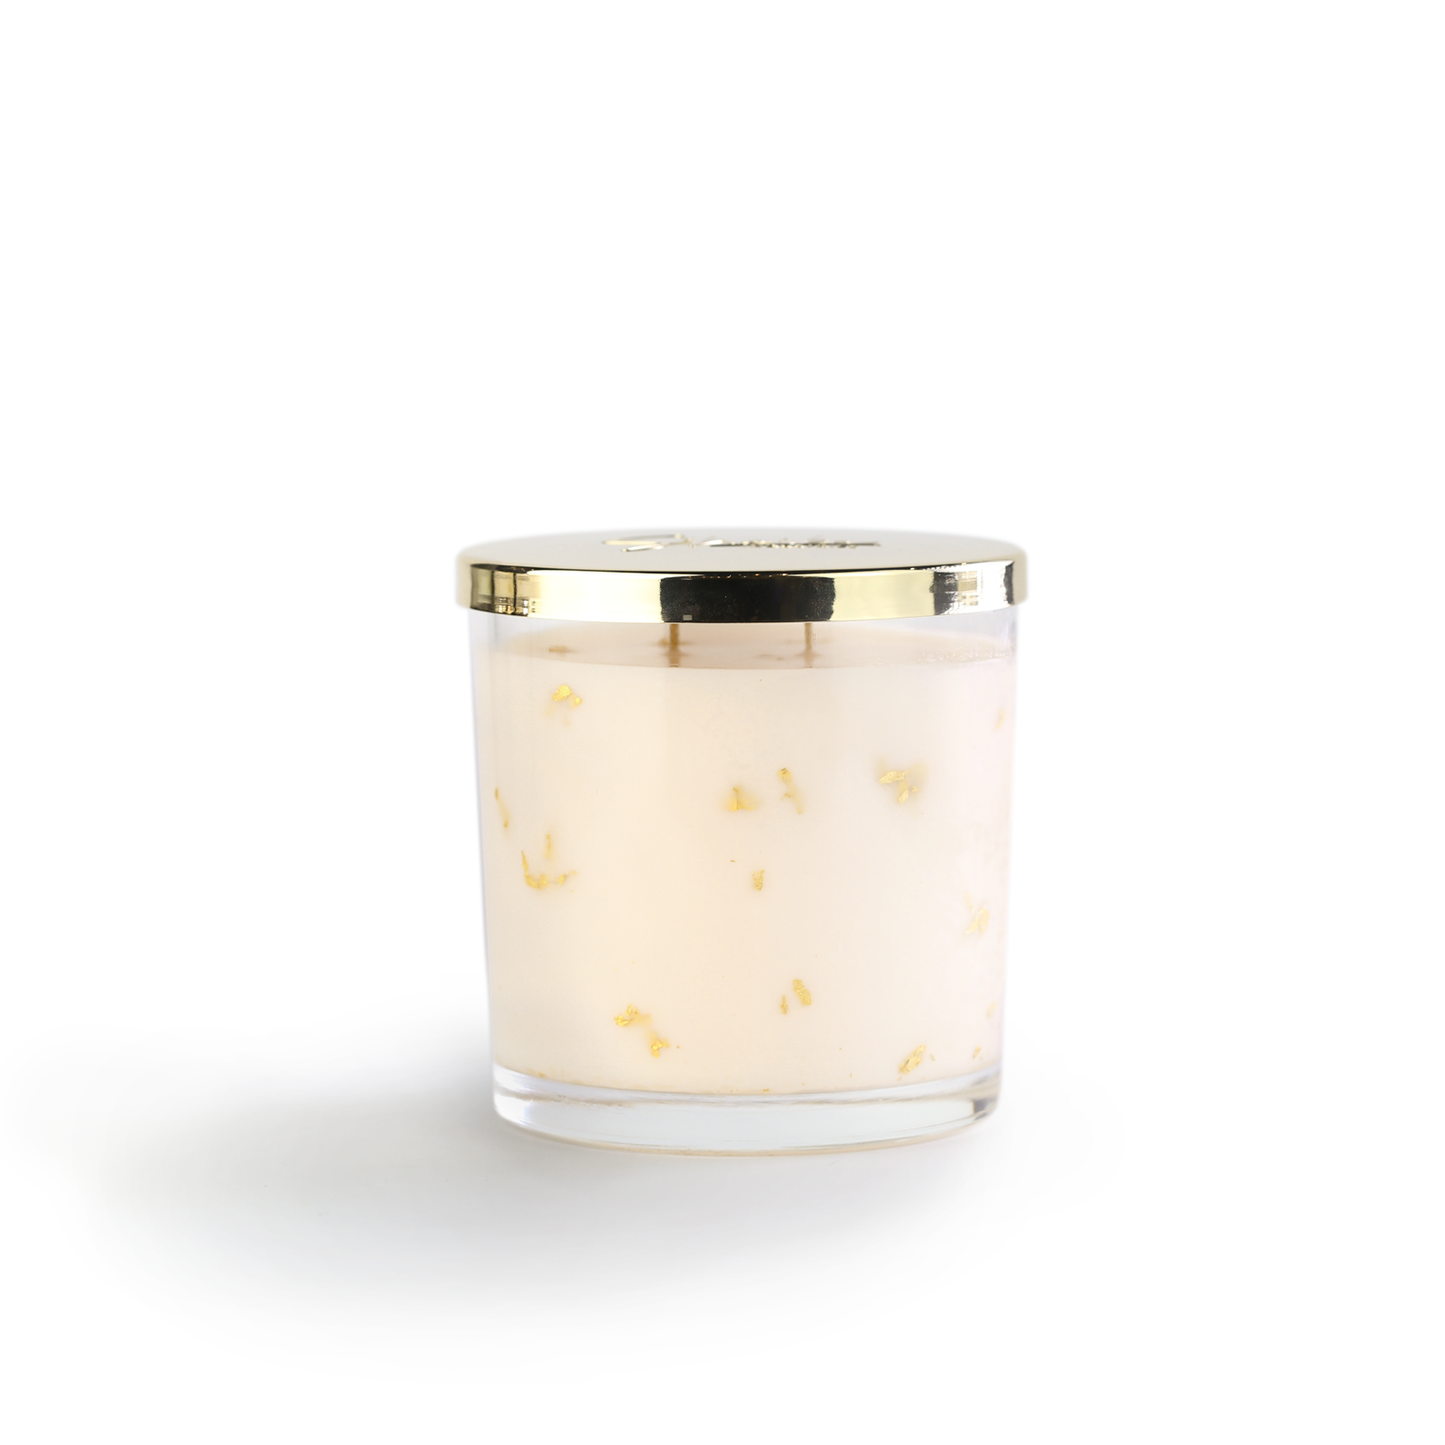 
                  
                    Elixir Vanilla Caramel Scented Candle - Blooming Gorgeous
                  
                